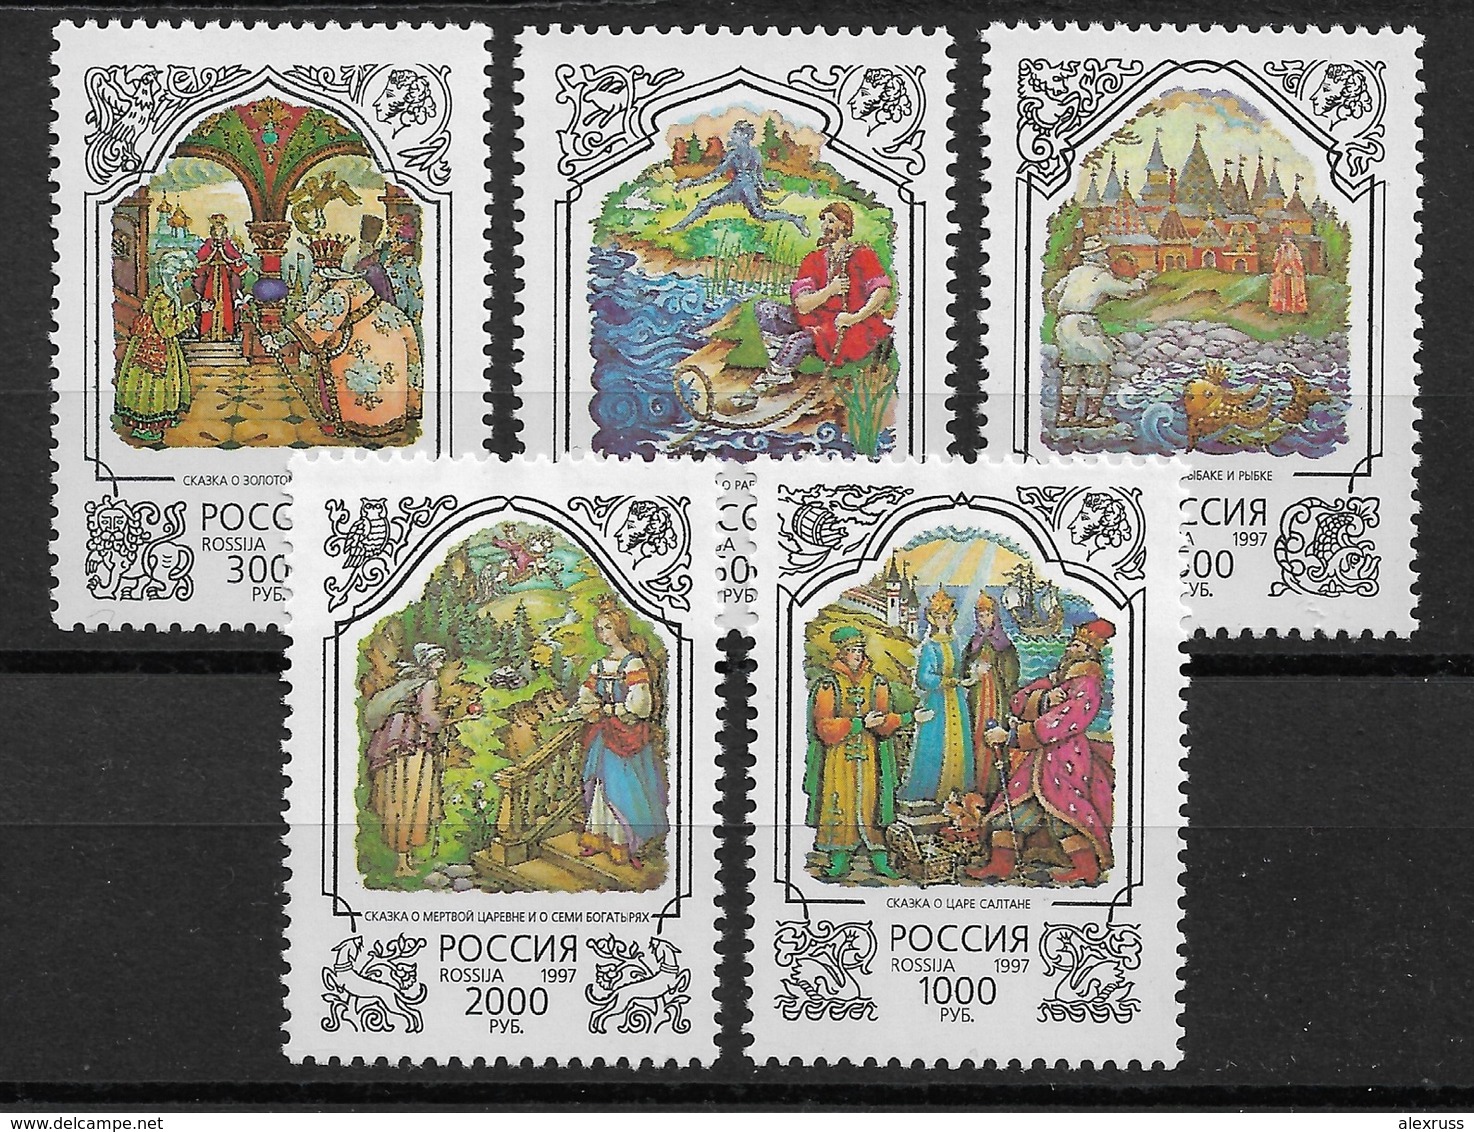 Russia 1997 Fairy Tales By Great Russian Writer And Poet Alexander Pushkin,Sc # 6391-6395,VF MNH** (OR-8) - Fairy Tales, Popular Stories & Legends